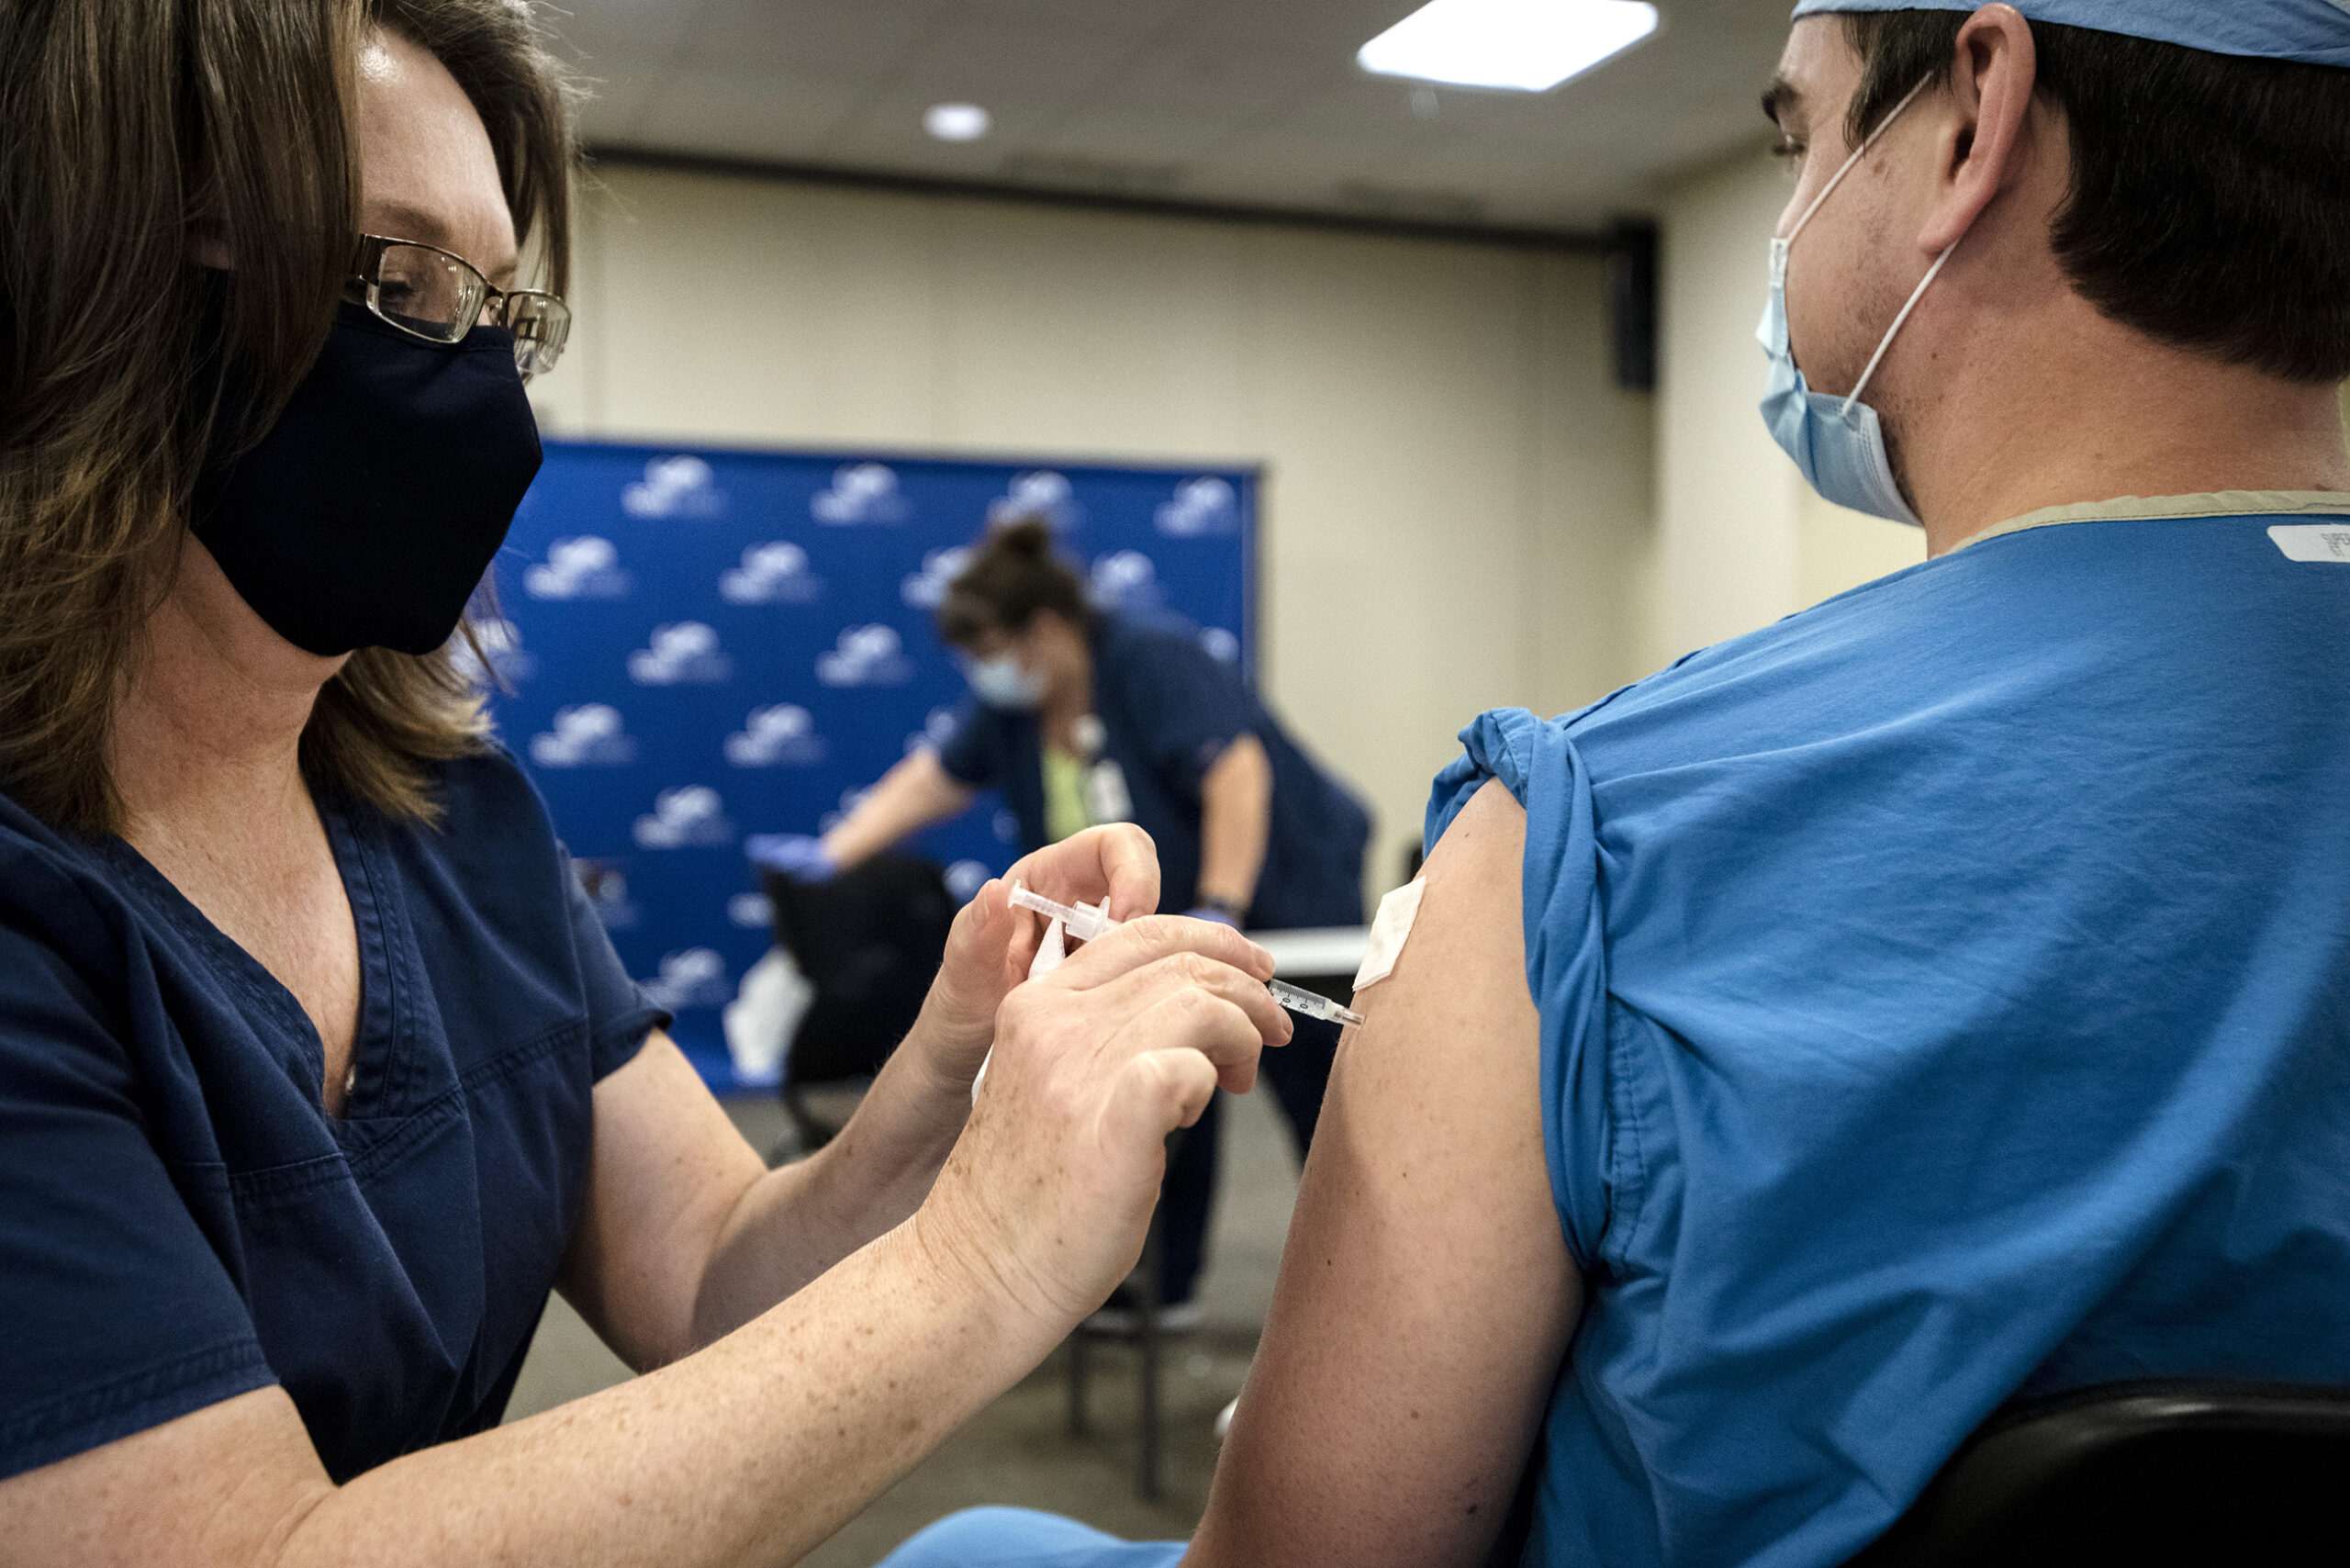 Health Officials: Pandemic Progress Depends On More Than The Vaccine